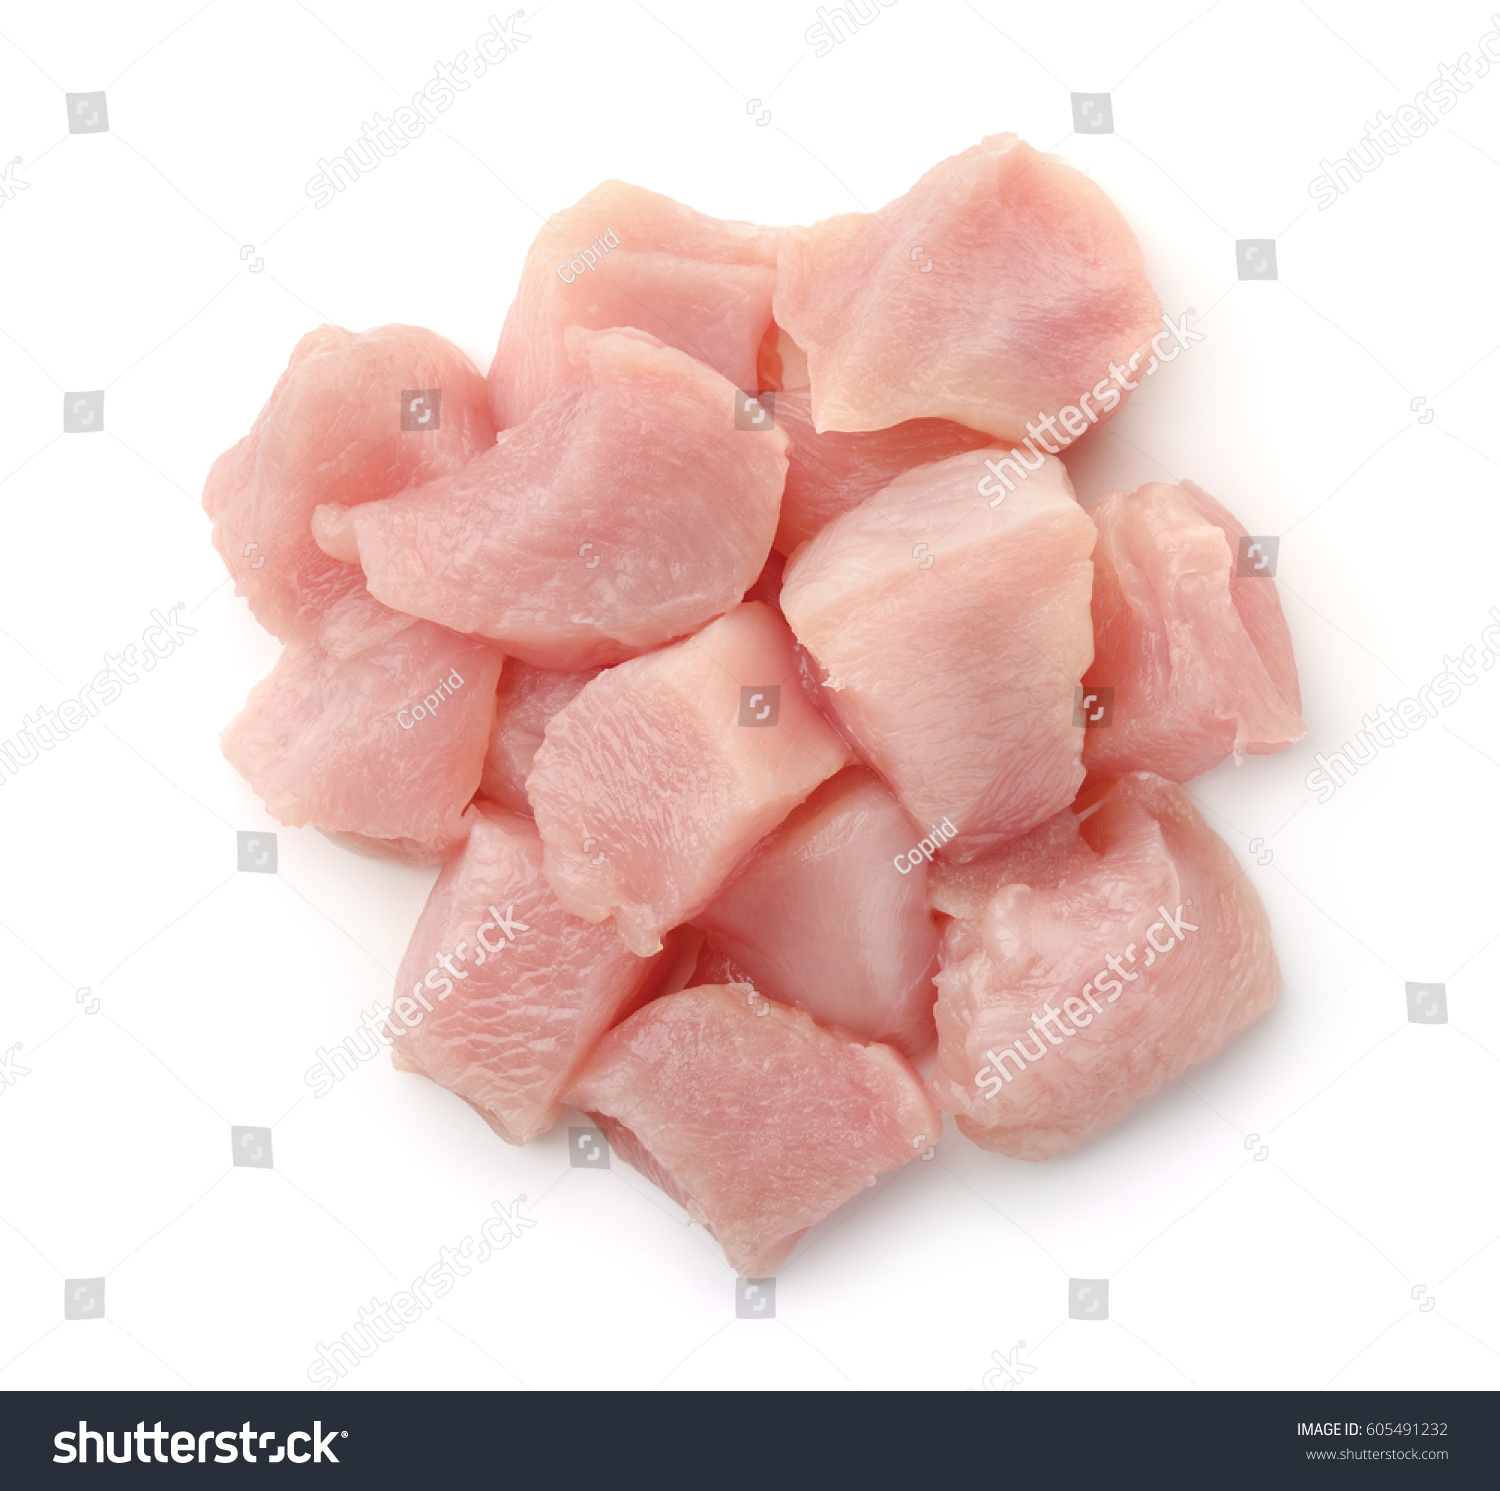 Top view of raw chicken fillet chunks isolated on white #605491232